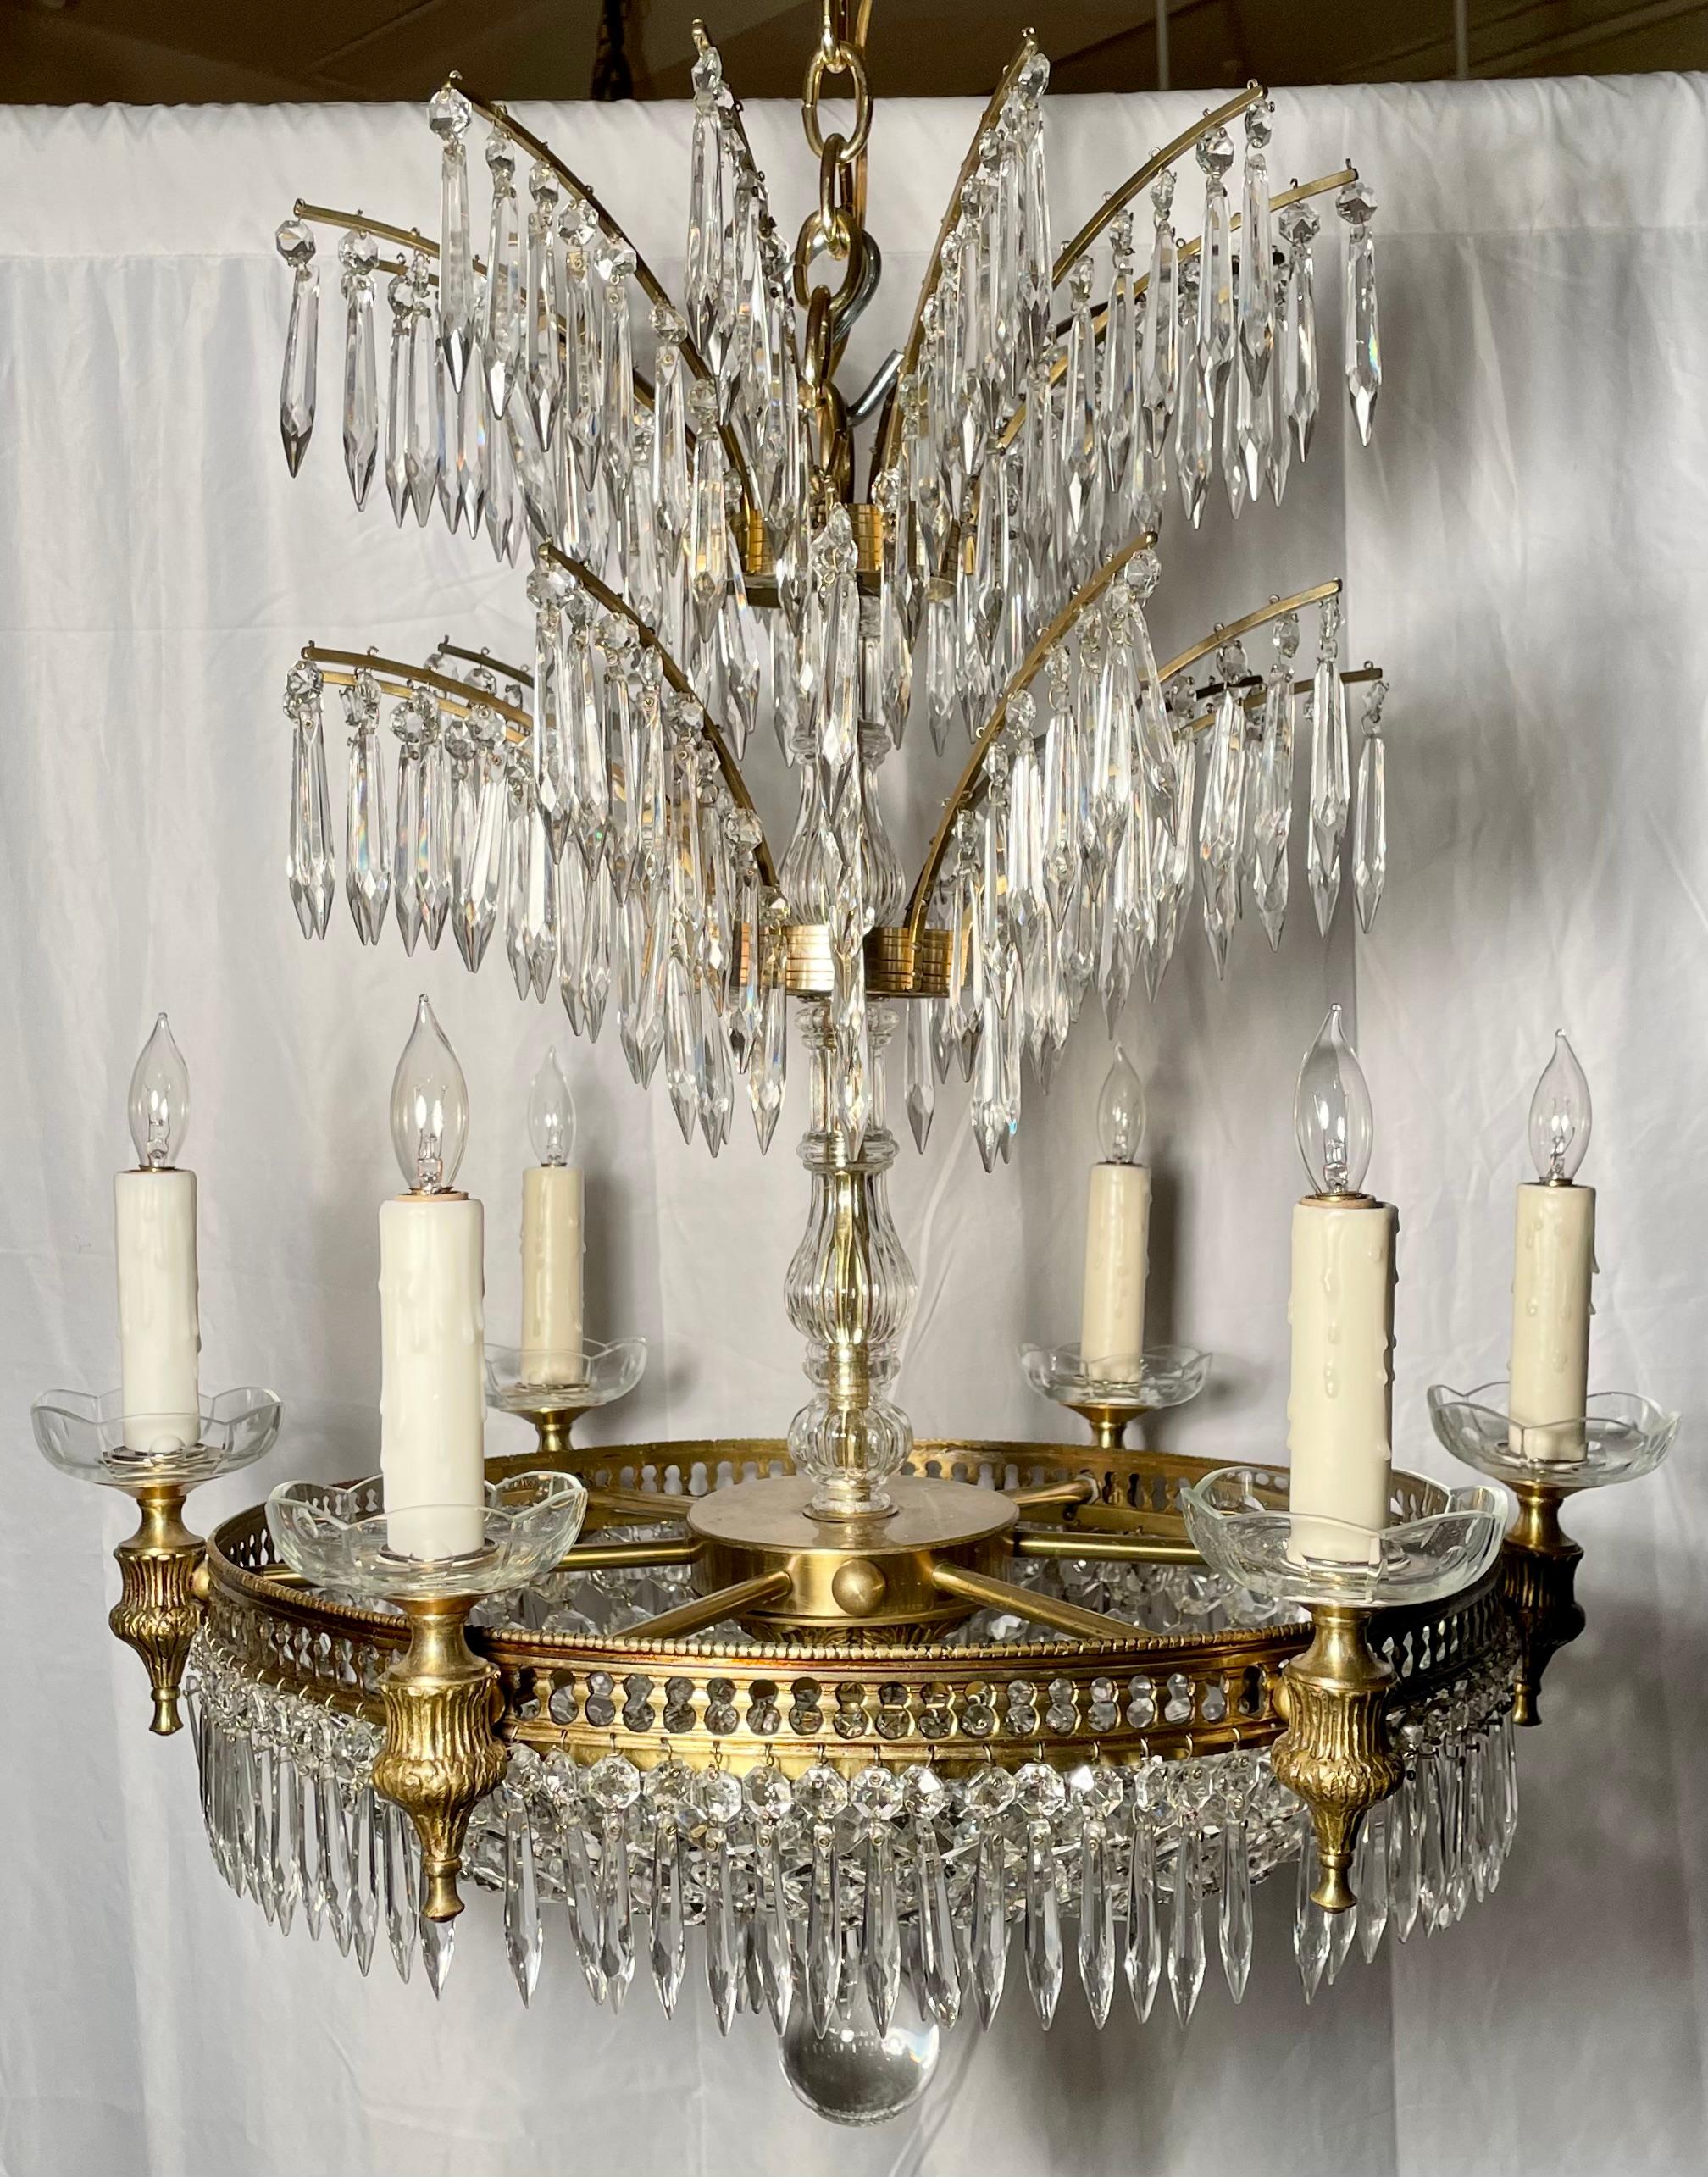 Antique French Neo-Classical chandelier, circa 1910.